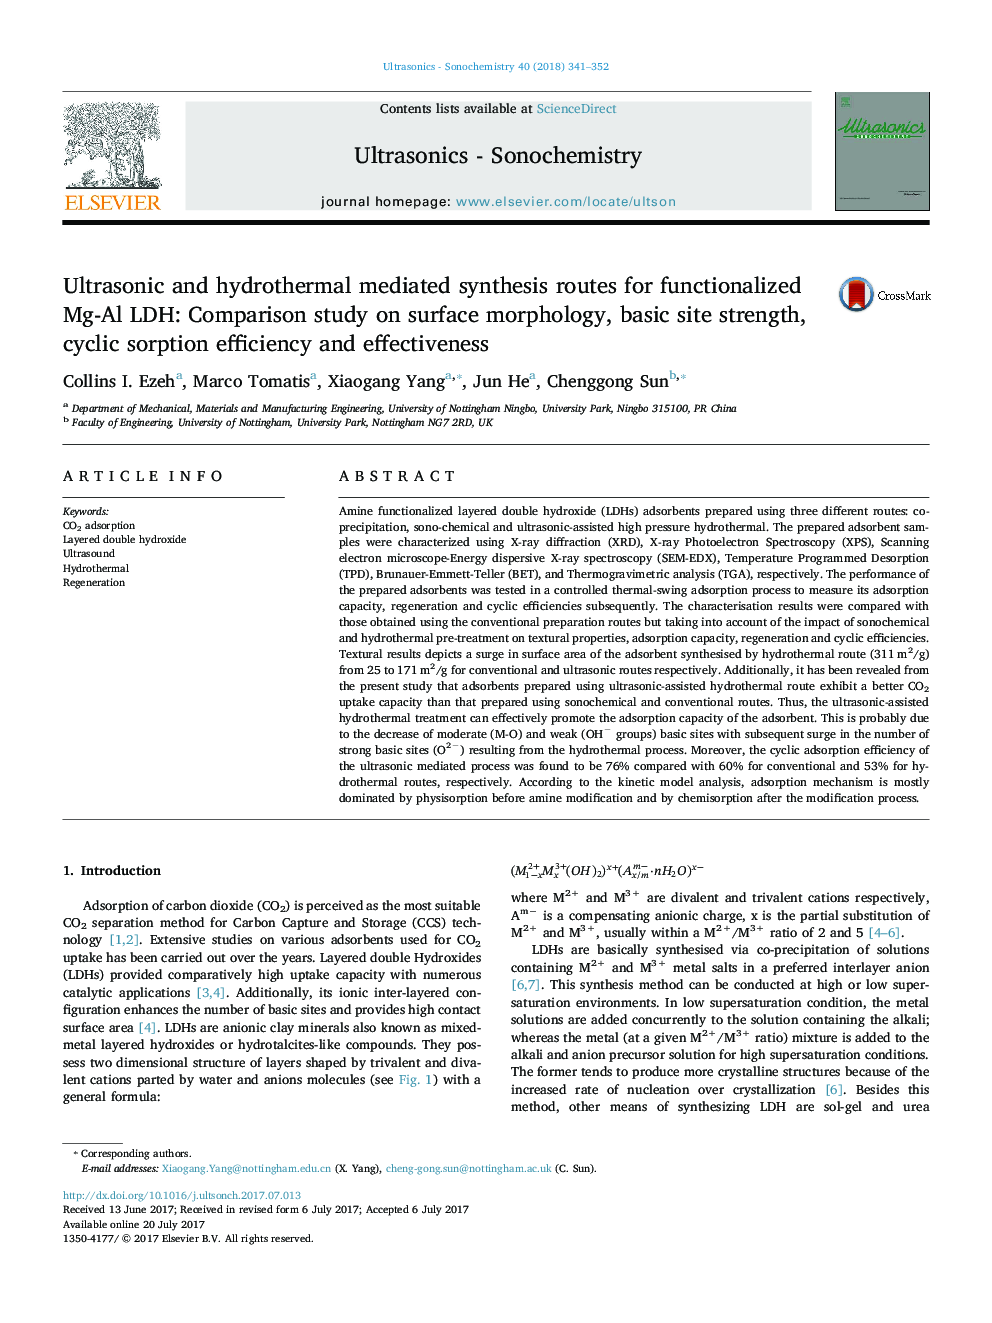 Ultrasonic and hydrothermal mediated synthesis routes for functionalized Mg-Al LDH: Comparison study on surface morphology, basic site strength, cyclic sorption efficiency and effectiveness